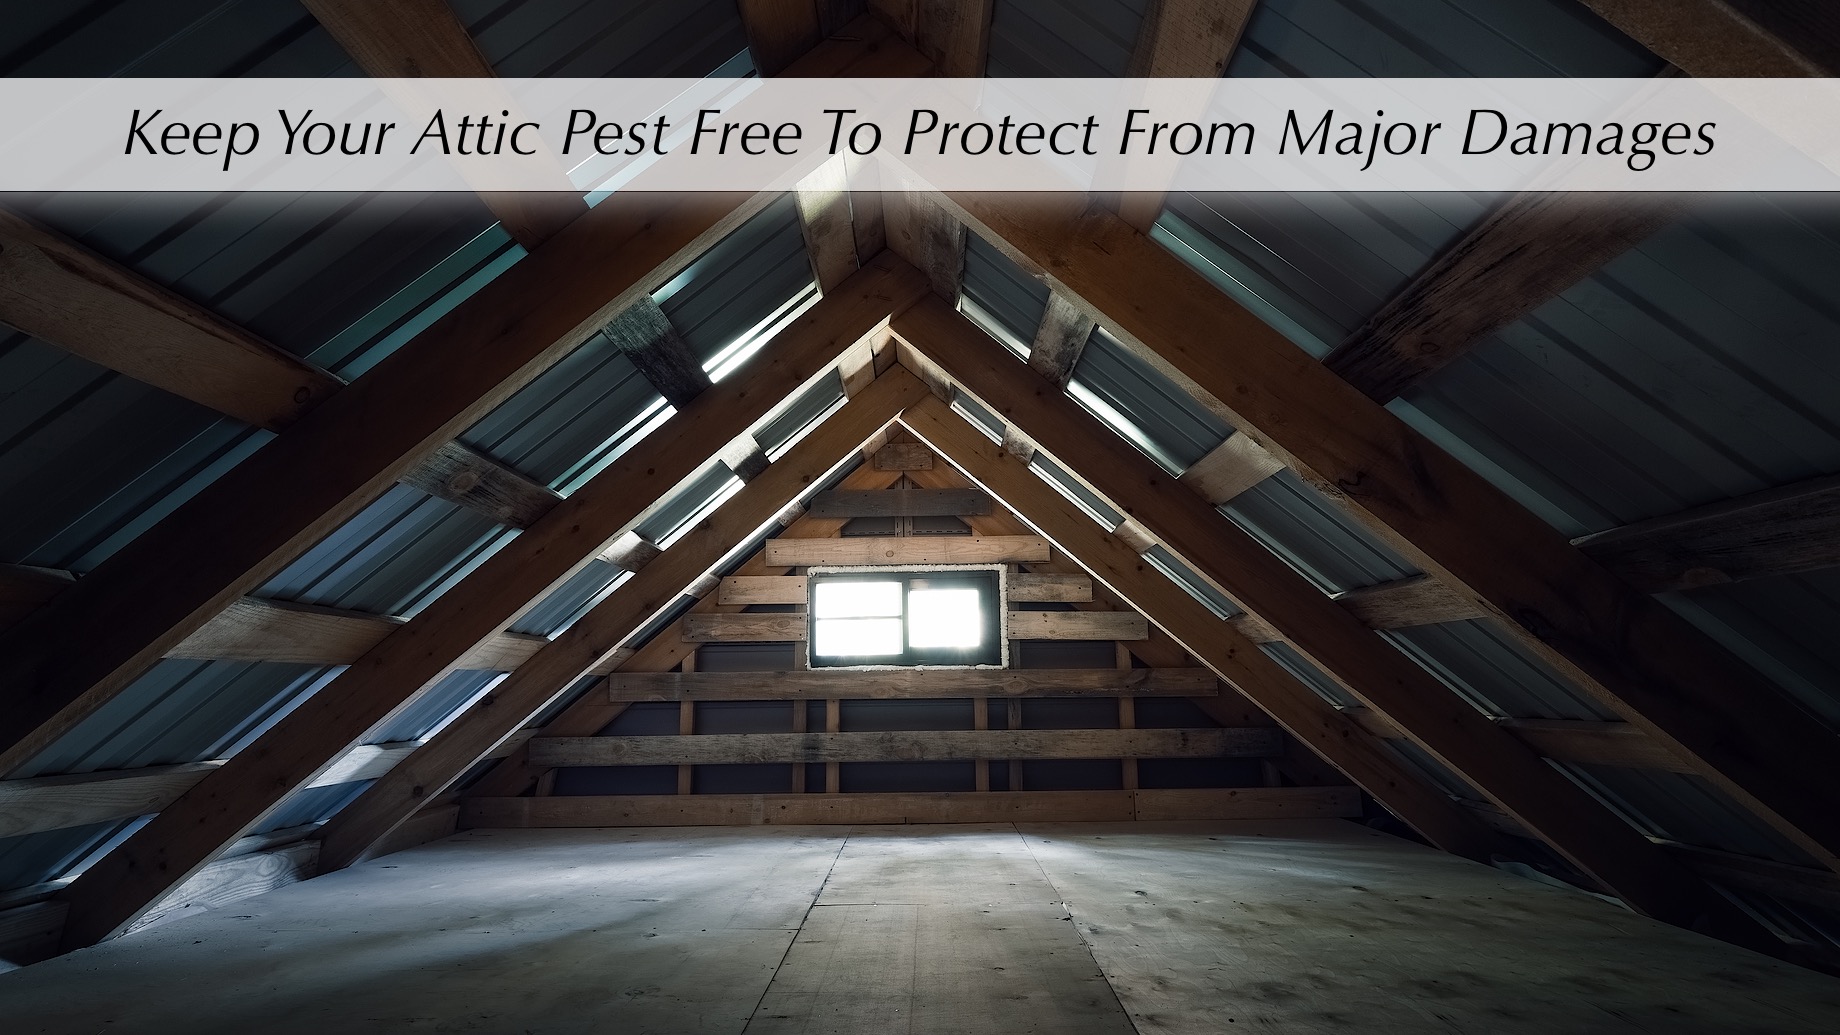 Keep Your Attic Pest Free To Protect From Major Damages